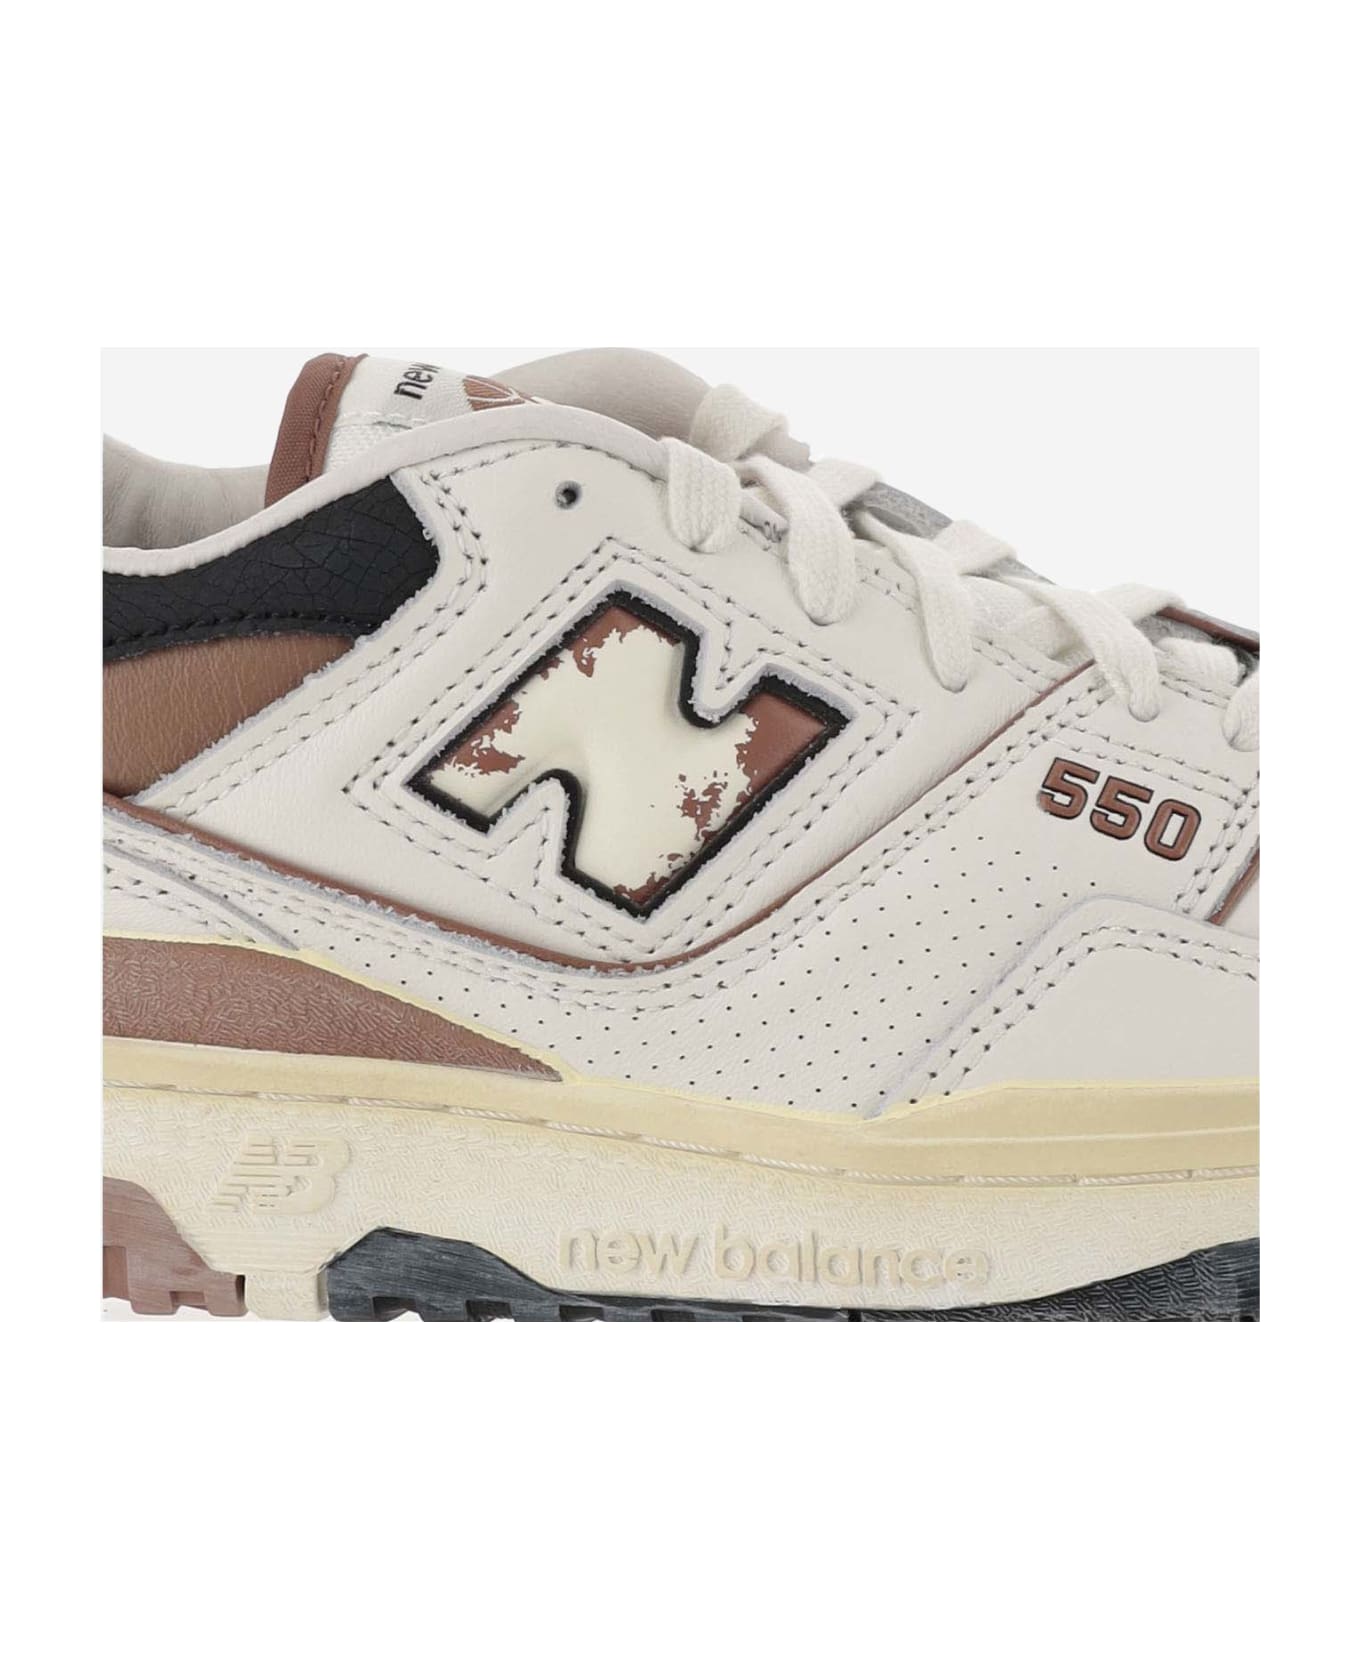 New Balance Sneakers 550 - Brown